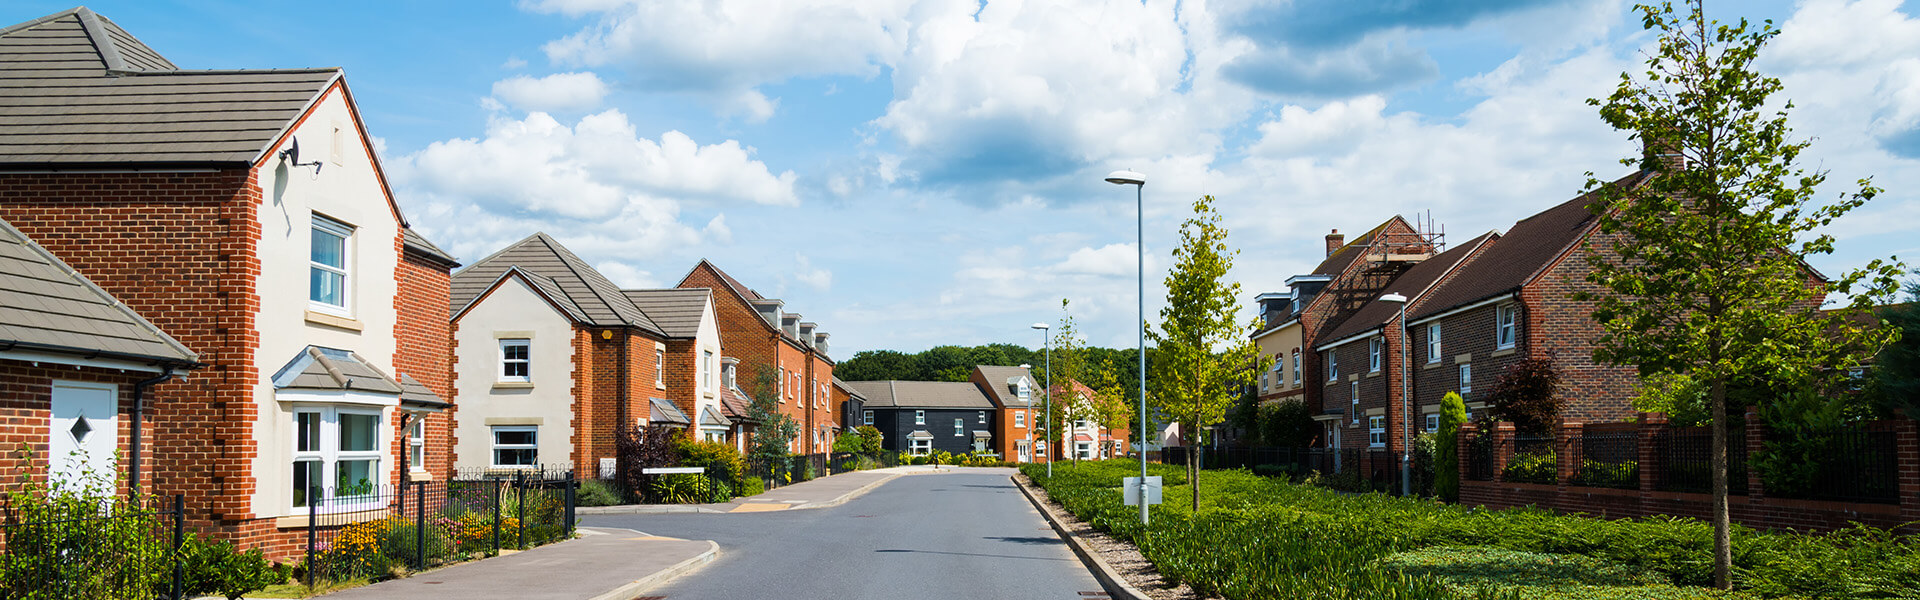 Browne Jacobson’s private equity team advise Palatine Private Equity on its buyout of Midlands based developer of affordable homes